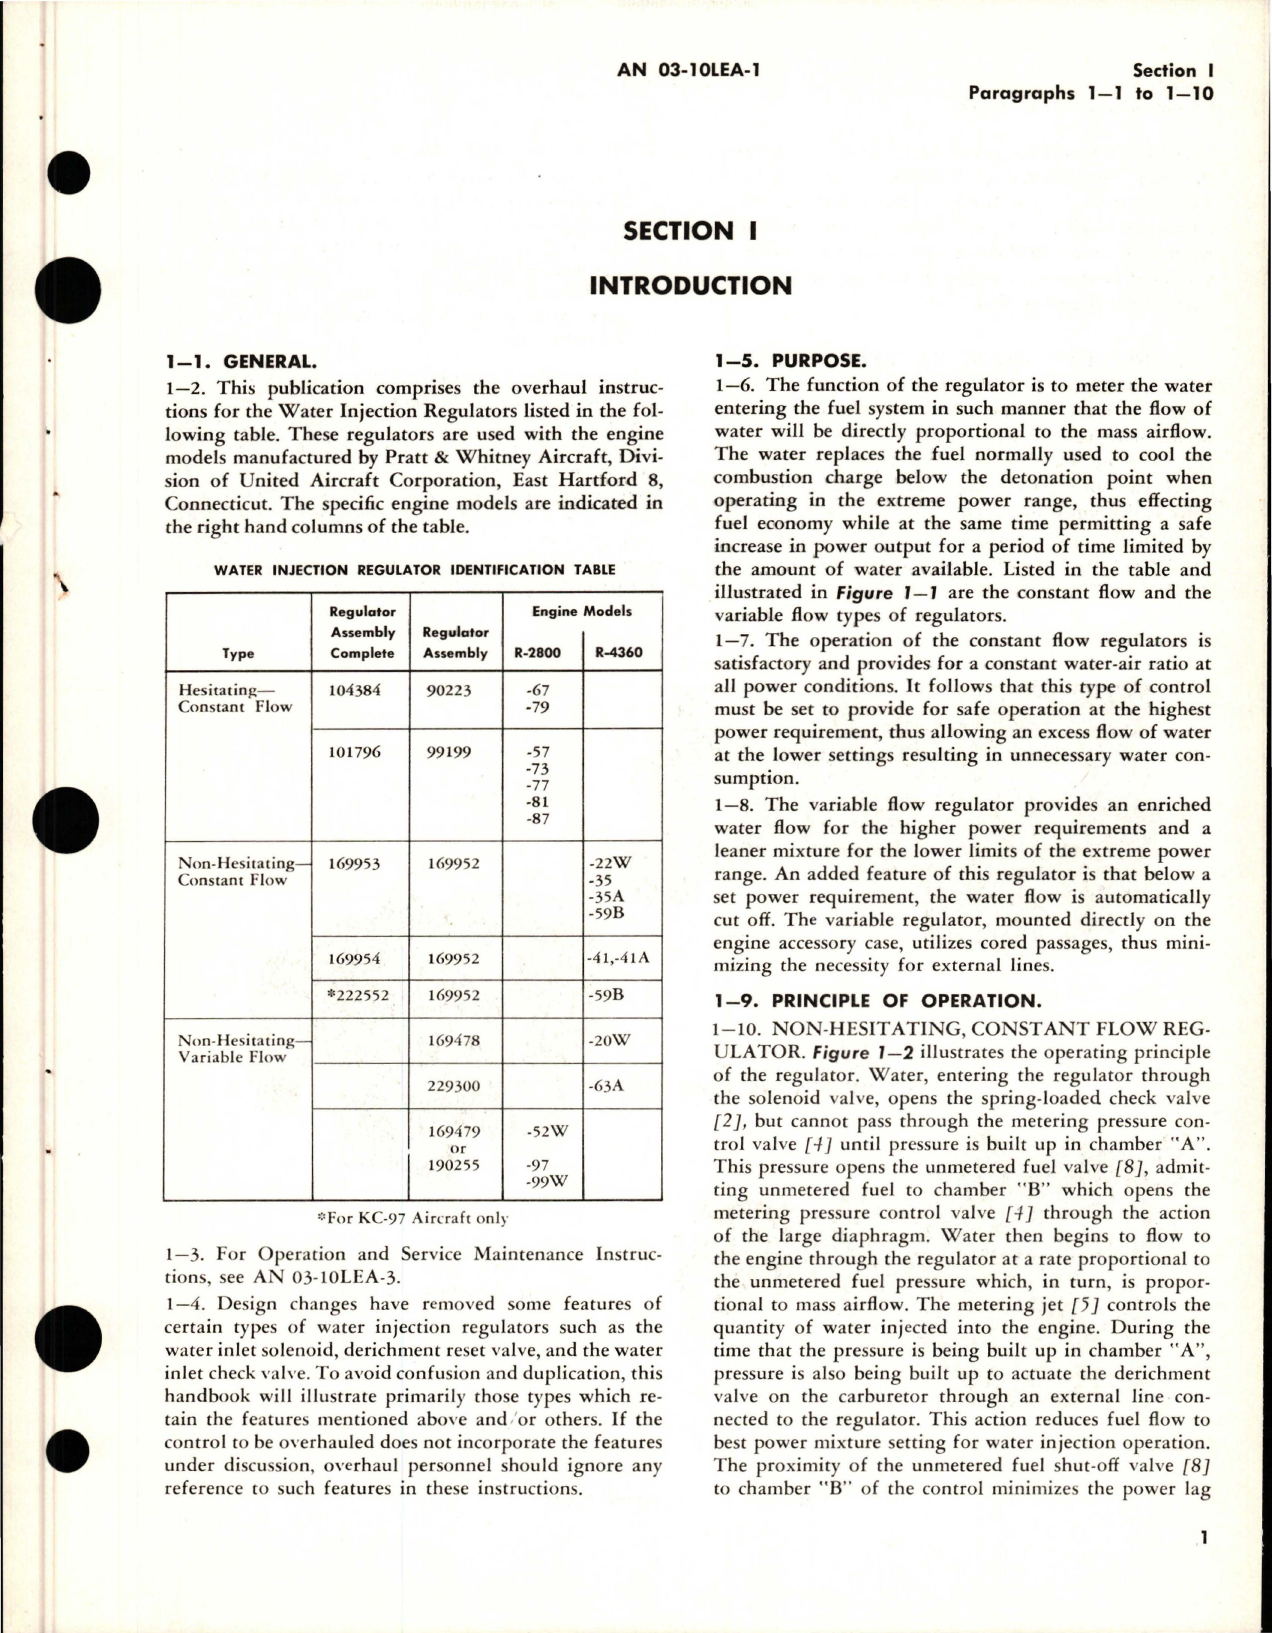 Sample page 5 from AirCorps Library document: Overhaul Instructions for Water Regulators